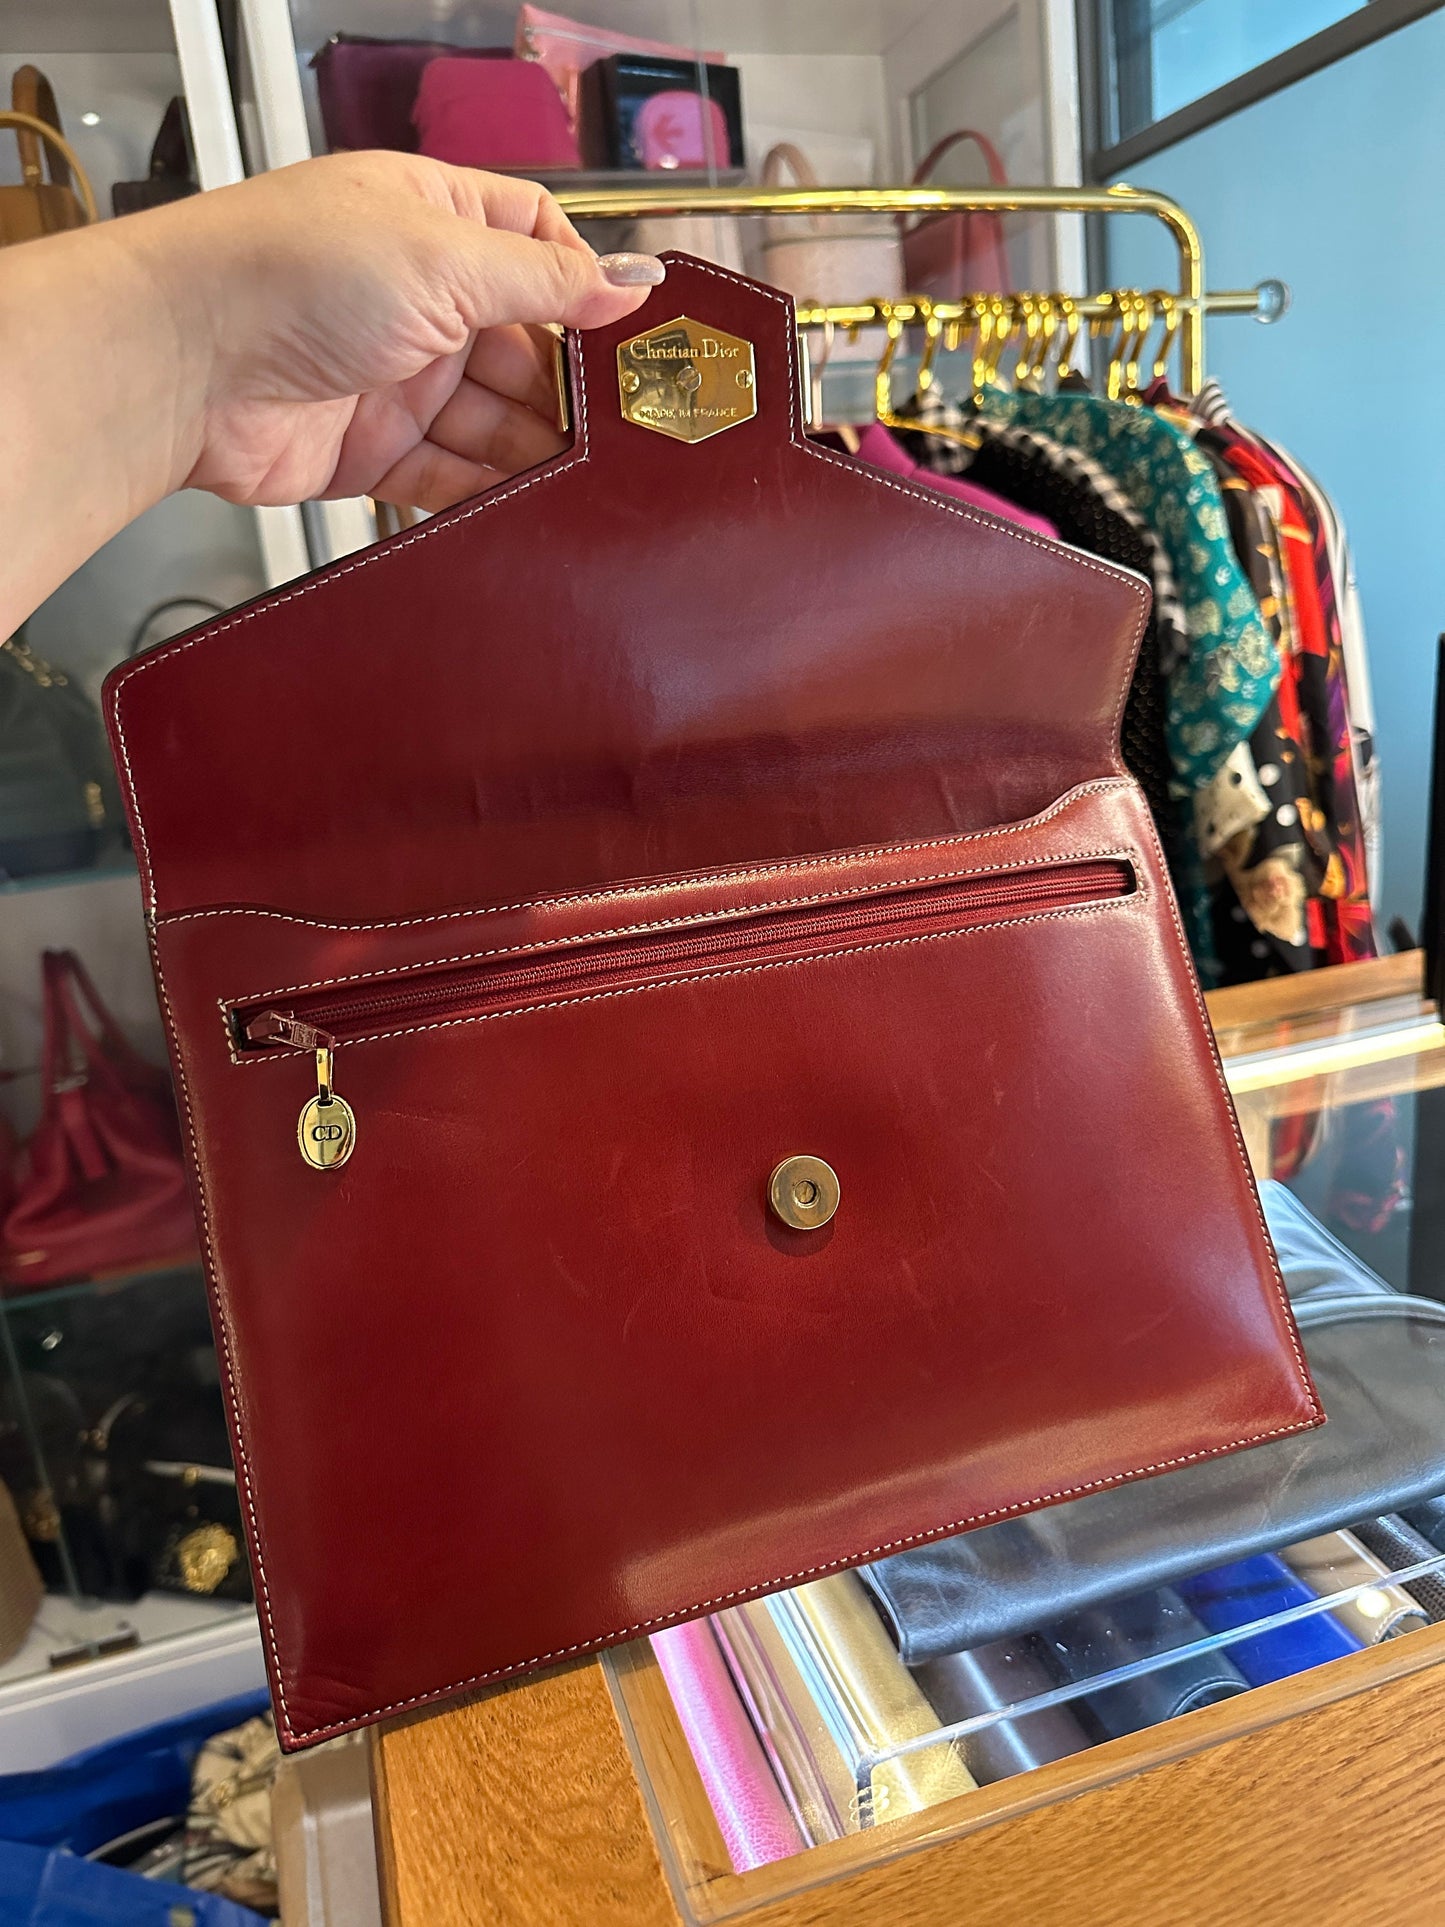 Christian DIOR VINTAGE 100% Authentic Genuine, Leather Clutch, Red, 1980's, Good Condition, Grade B